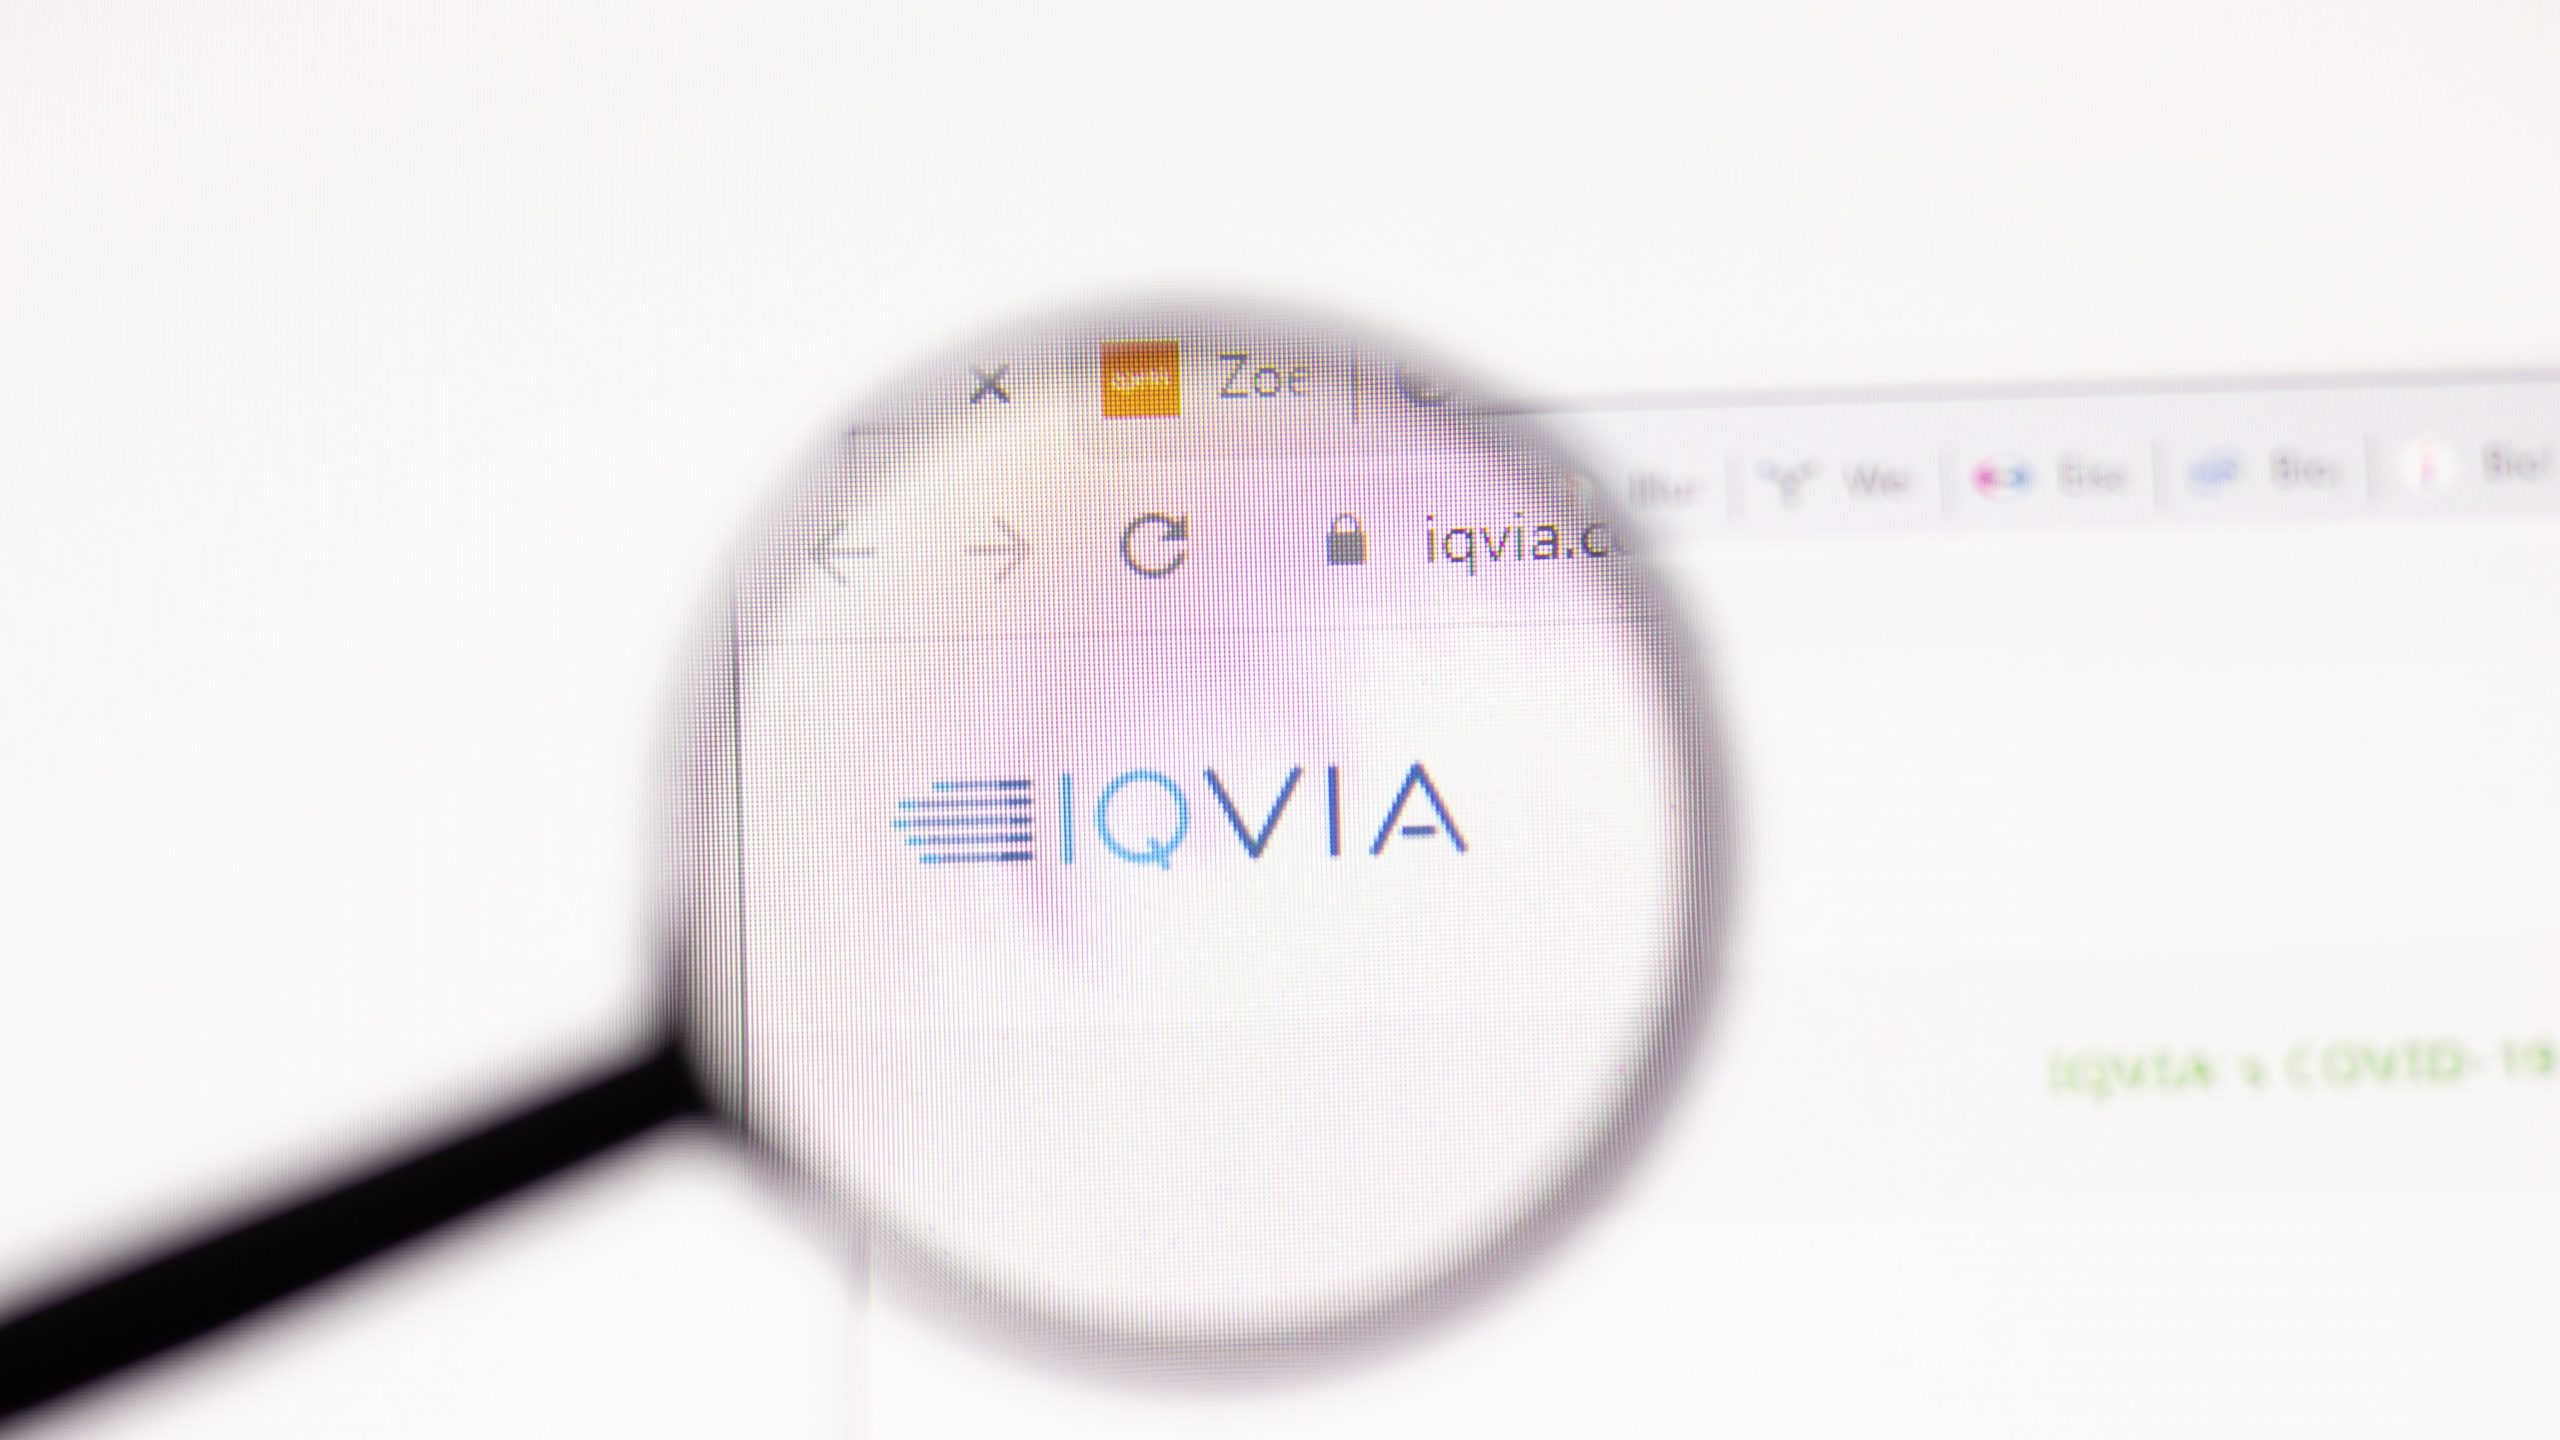 IQVIA's logo magnified displayed on computer screen